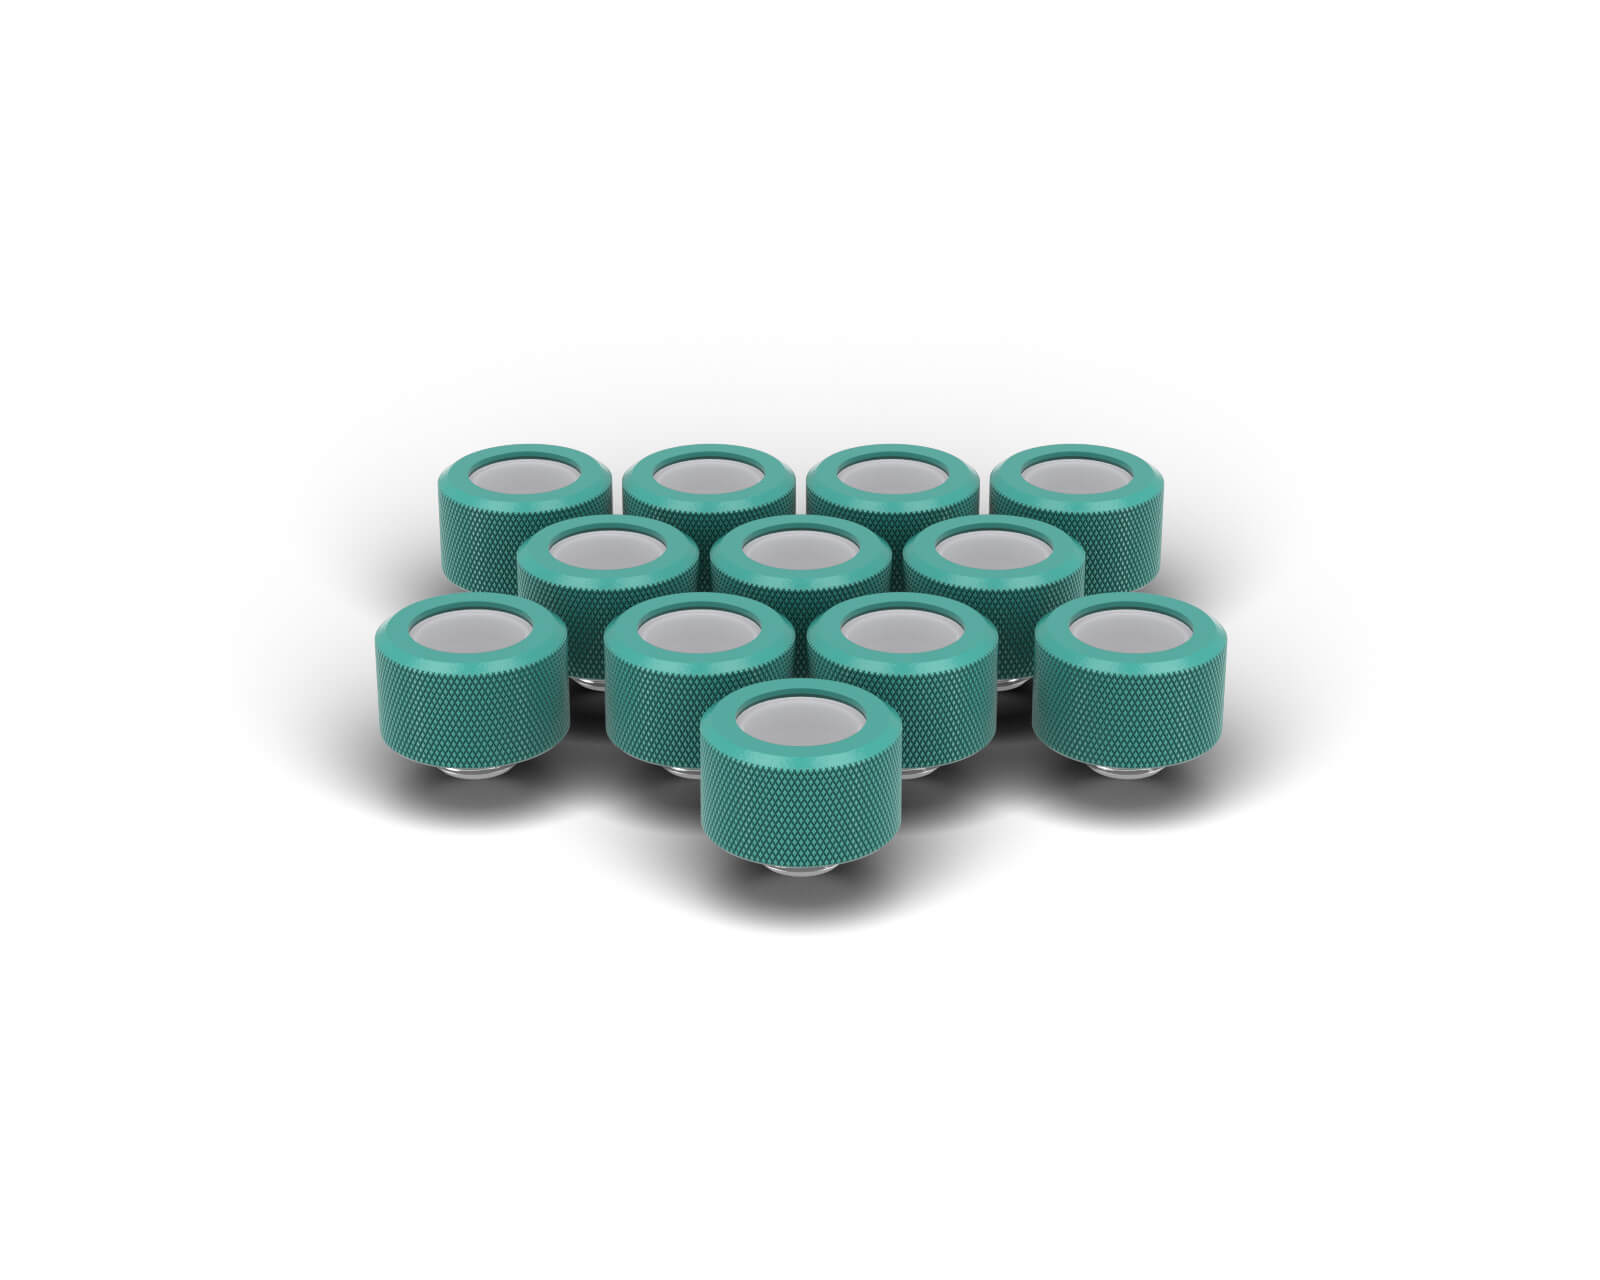 PrimoChill 16mm OD Rigid SX Fitting - 12 Pack - PrimoChill - KEEPING IT COOL Teal